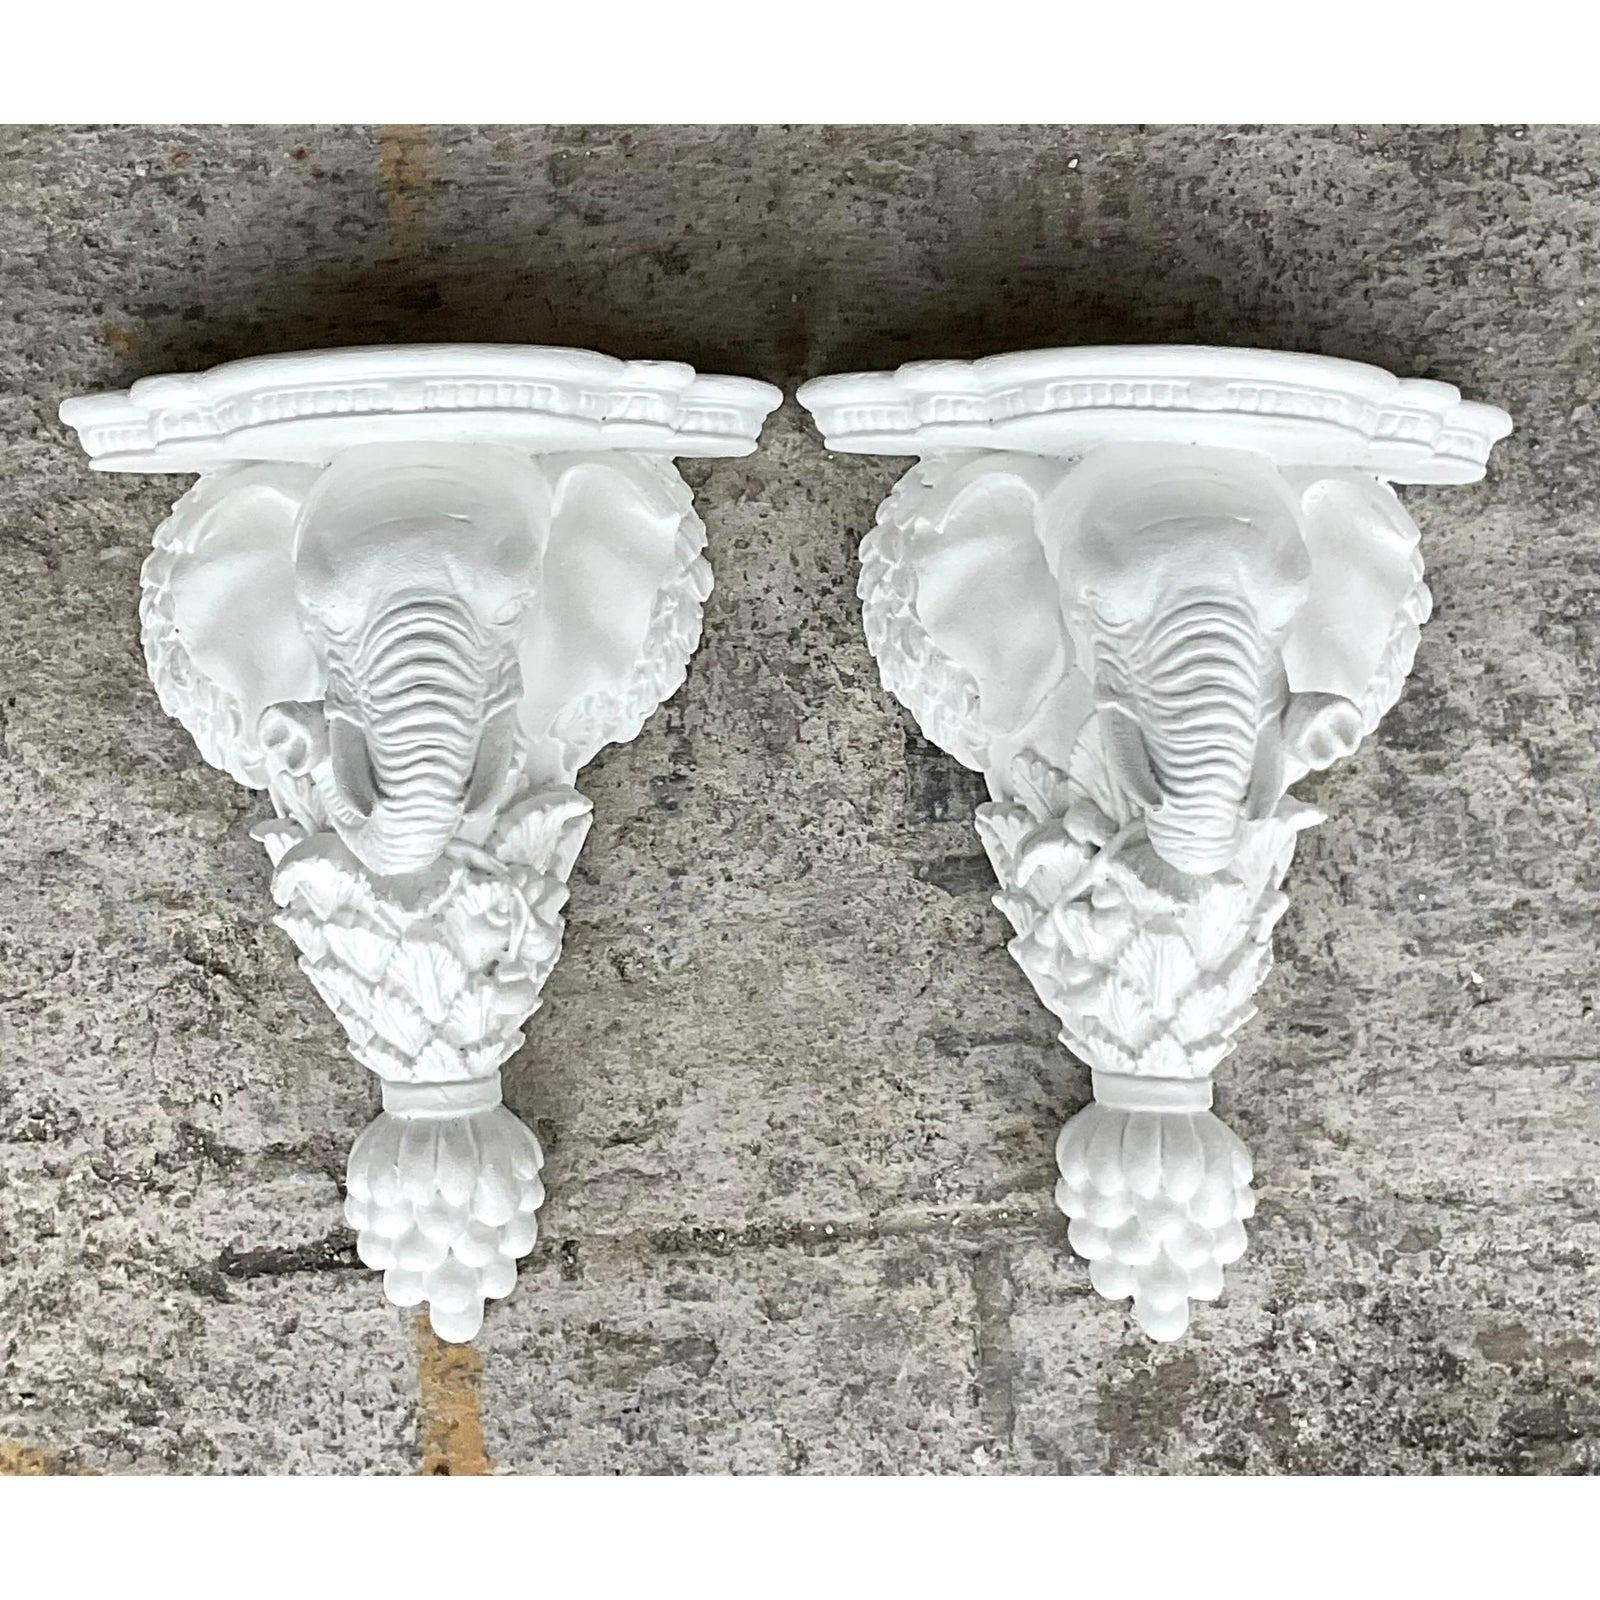 A fabulous pair of vintage Boho brackets. A chic pair of handsome elephants in a bright white finish. Perfect indoors or outside in a covered area. Acquired from a Palm Beach estate.